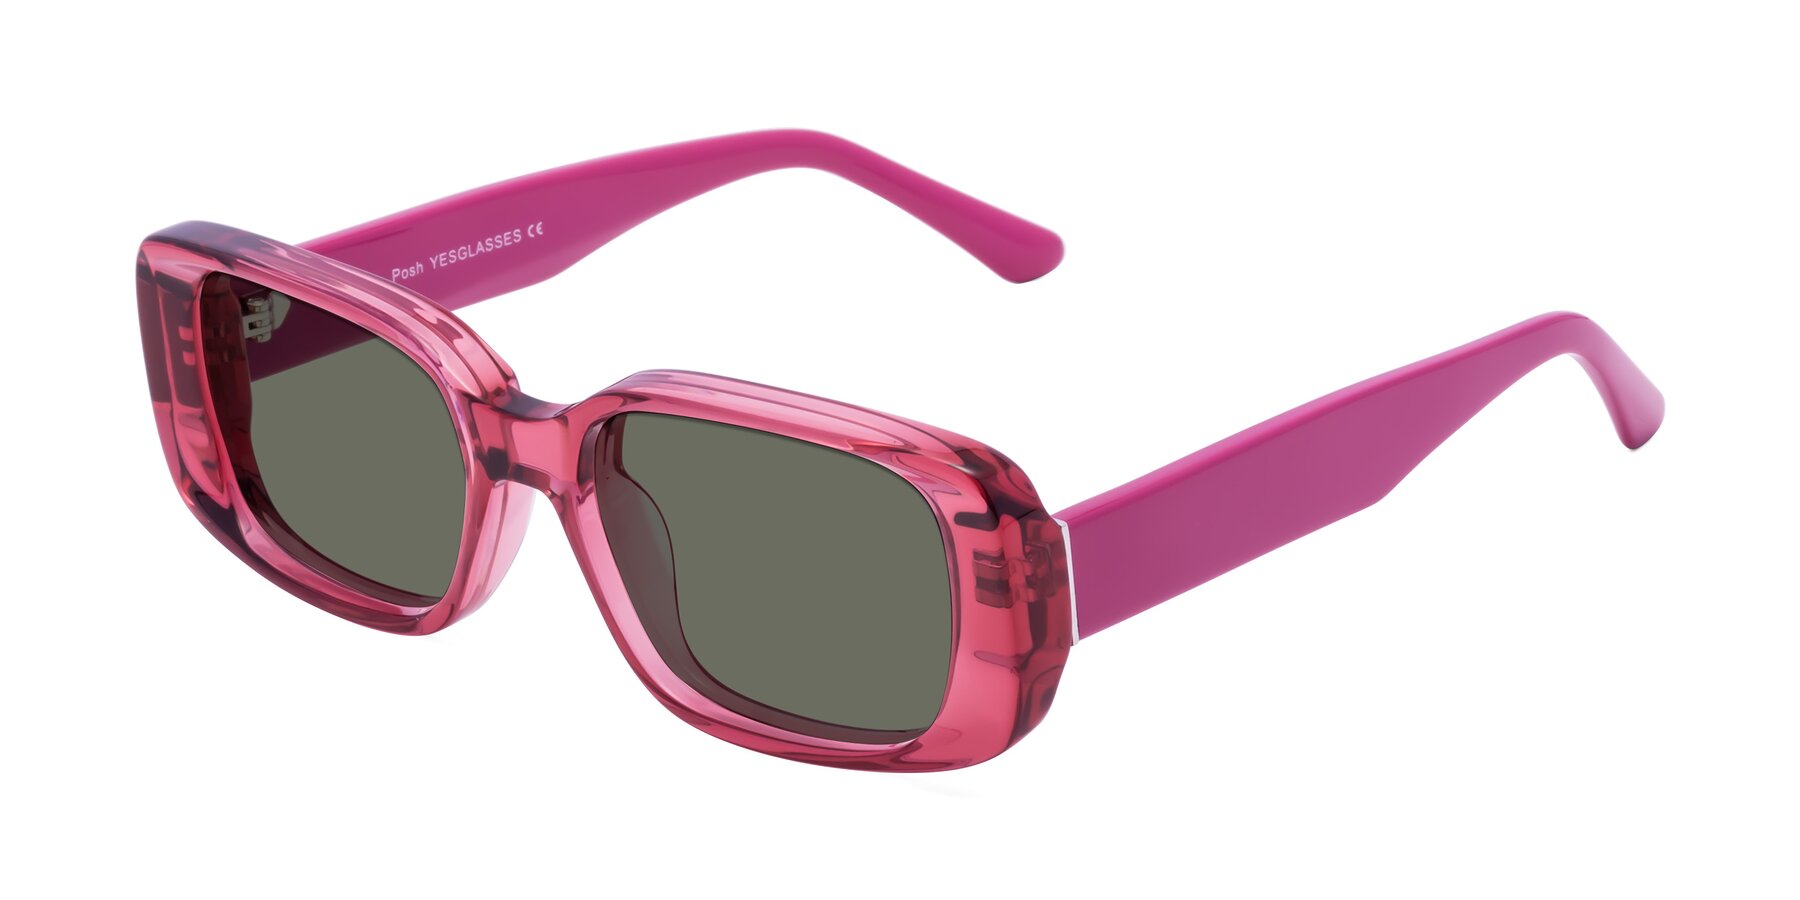 Angle of Posh in Transparent Pink with Gray Polarized Lenses